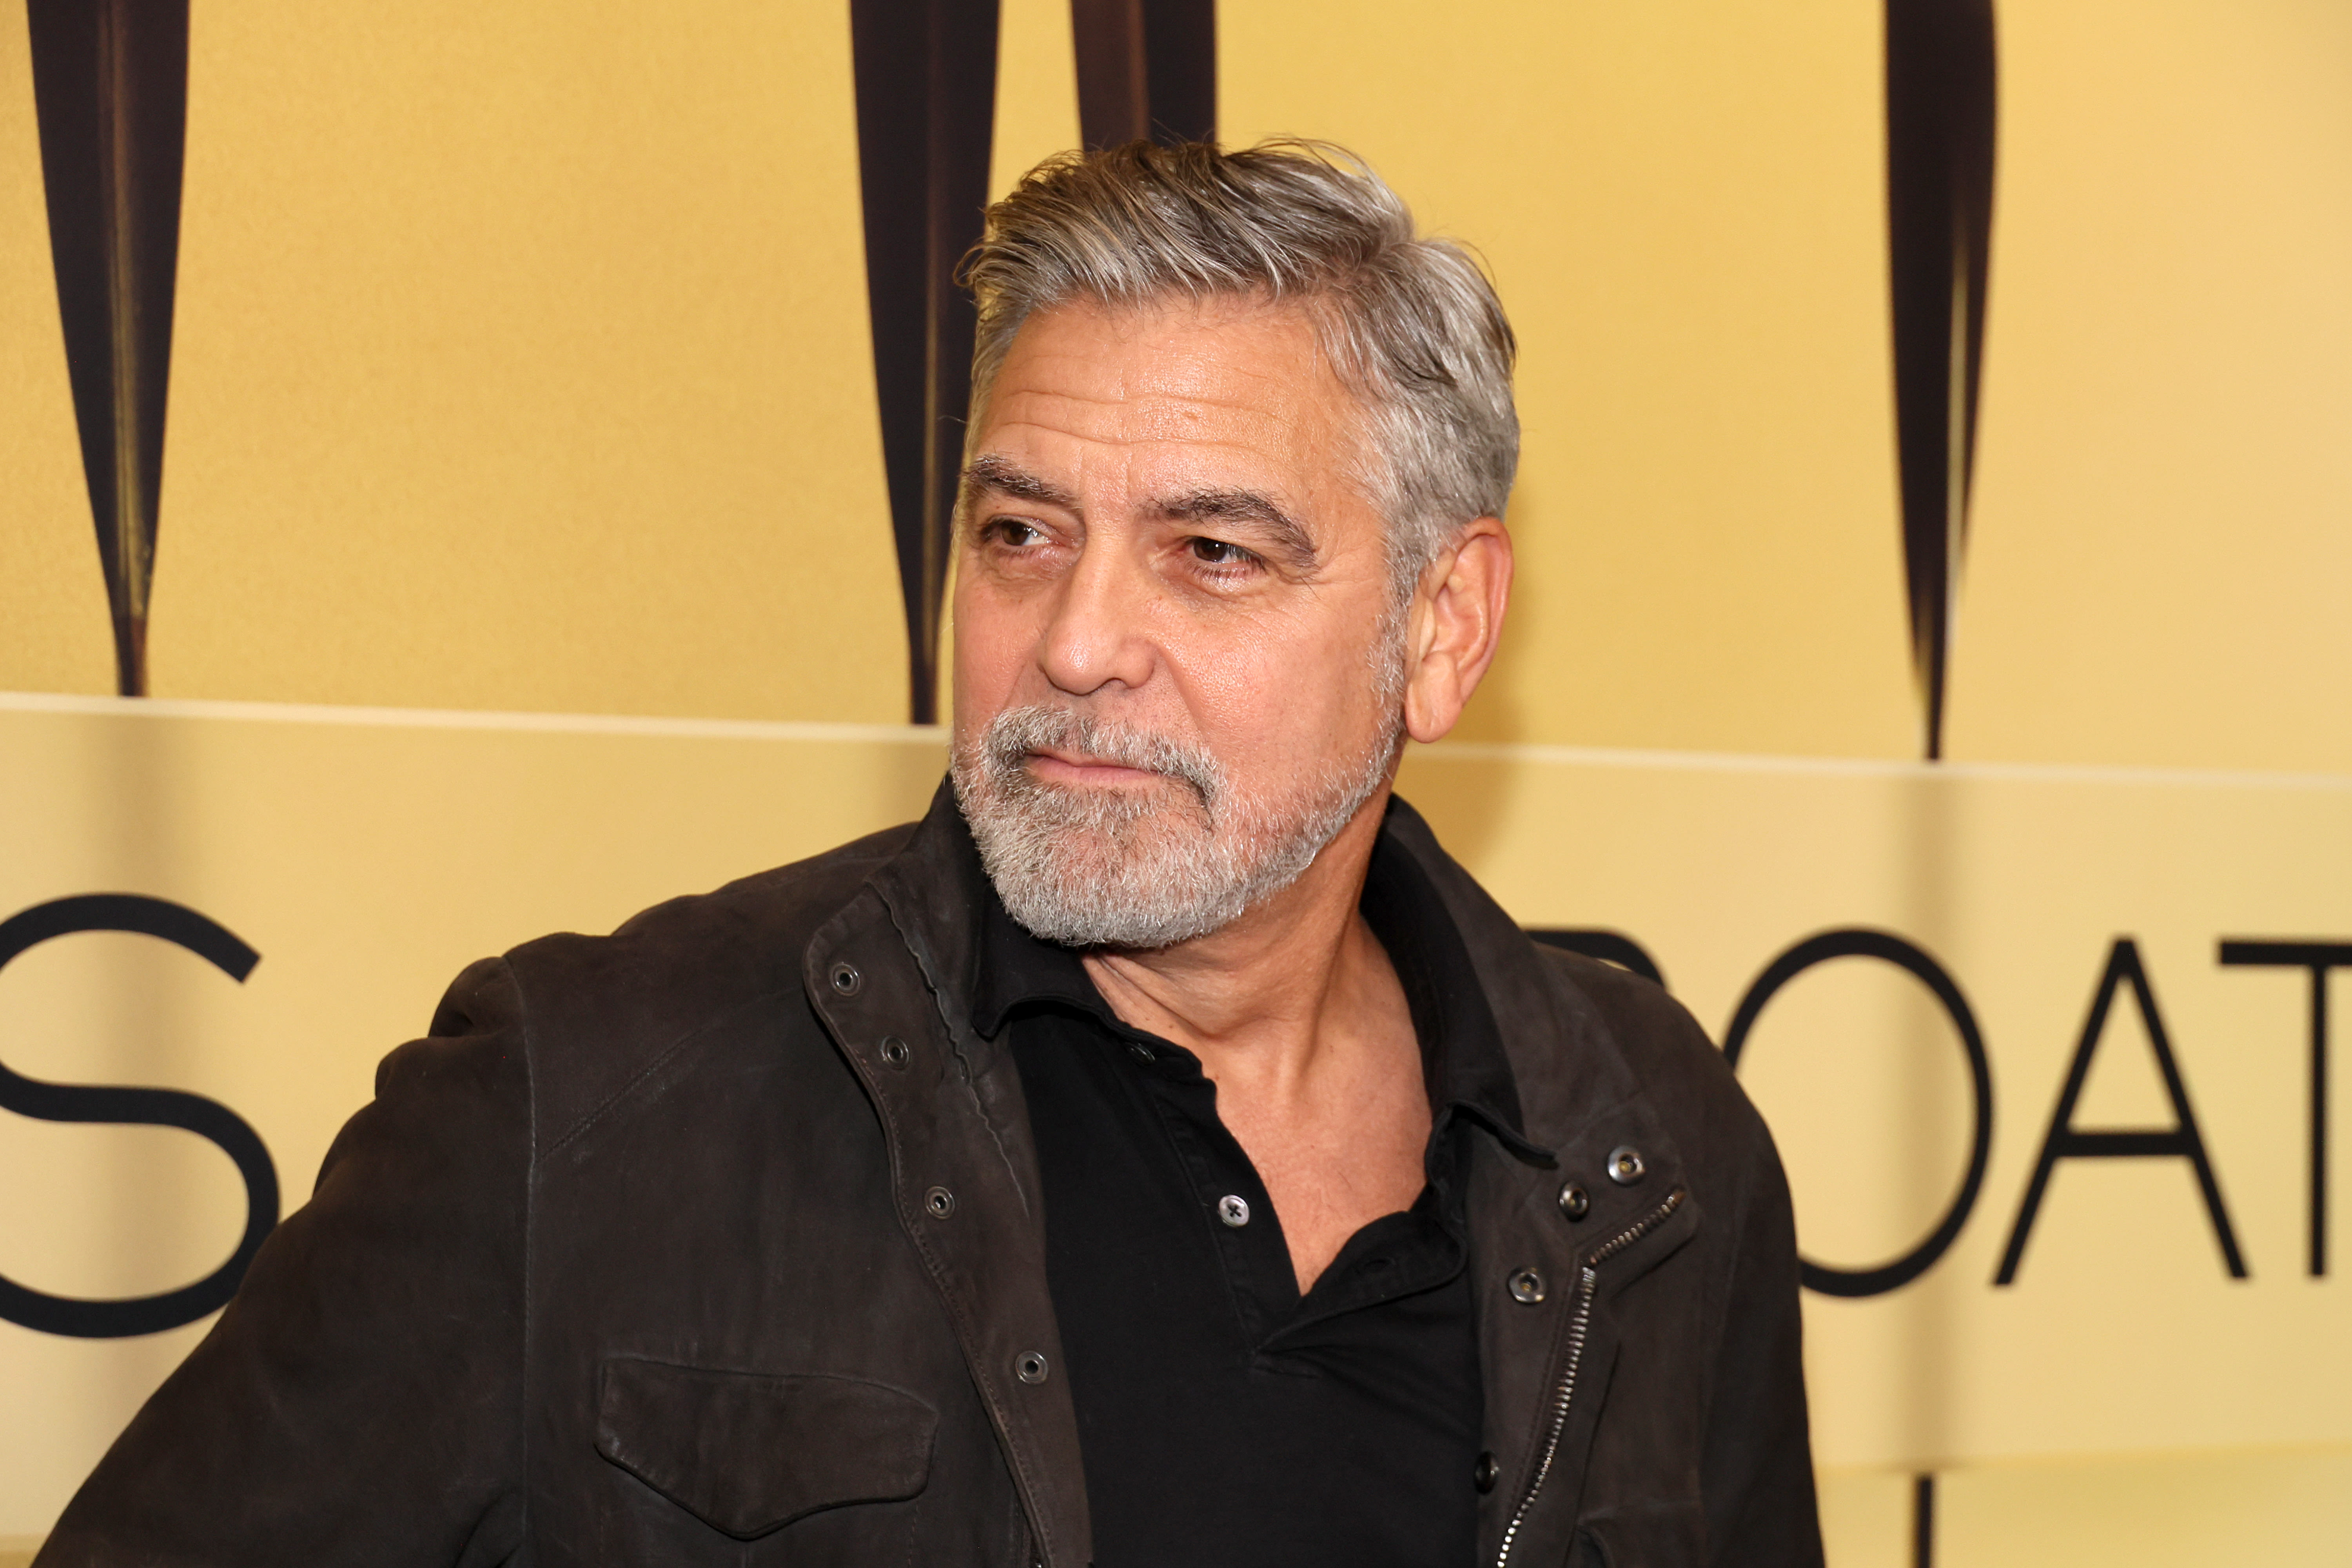 George Clooney’s Aging Panic! Actor Worries About Losing His Famous Looks After Turning 60